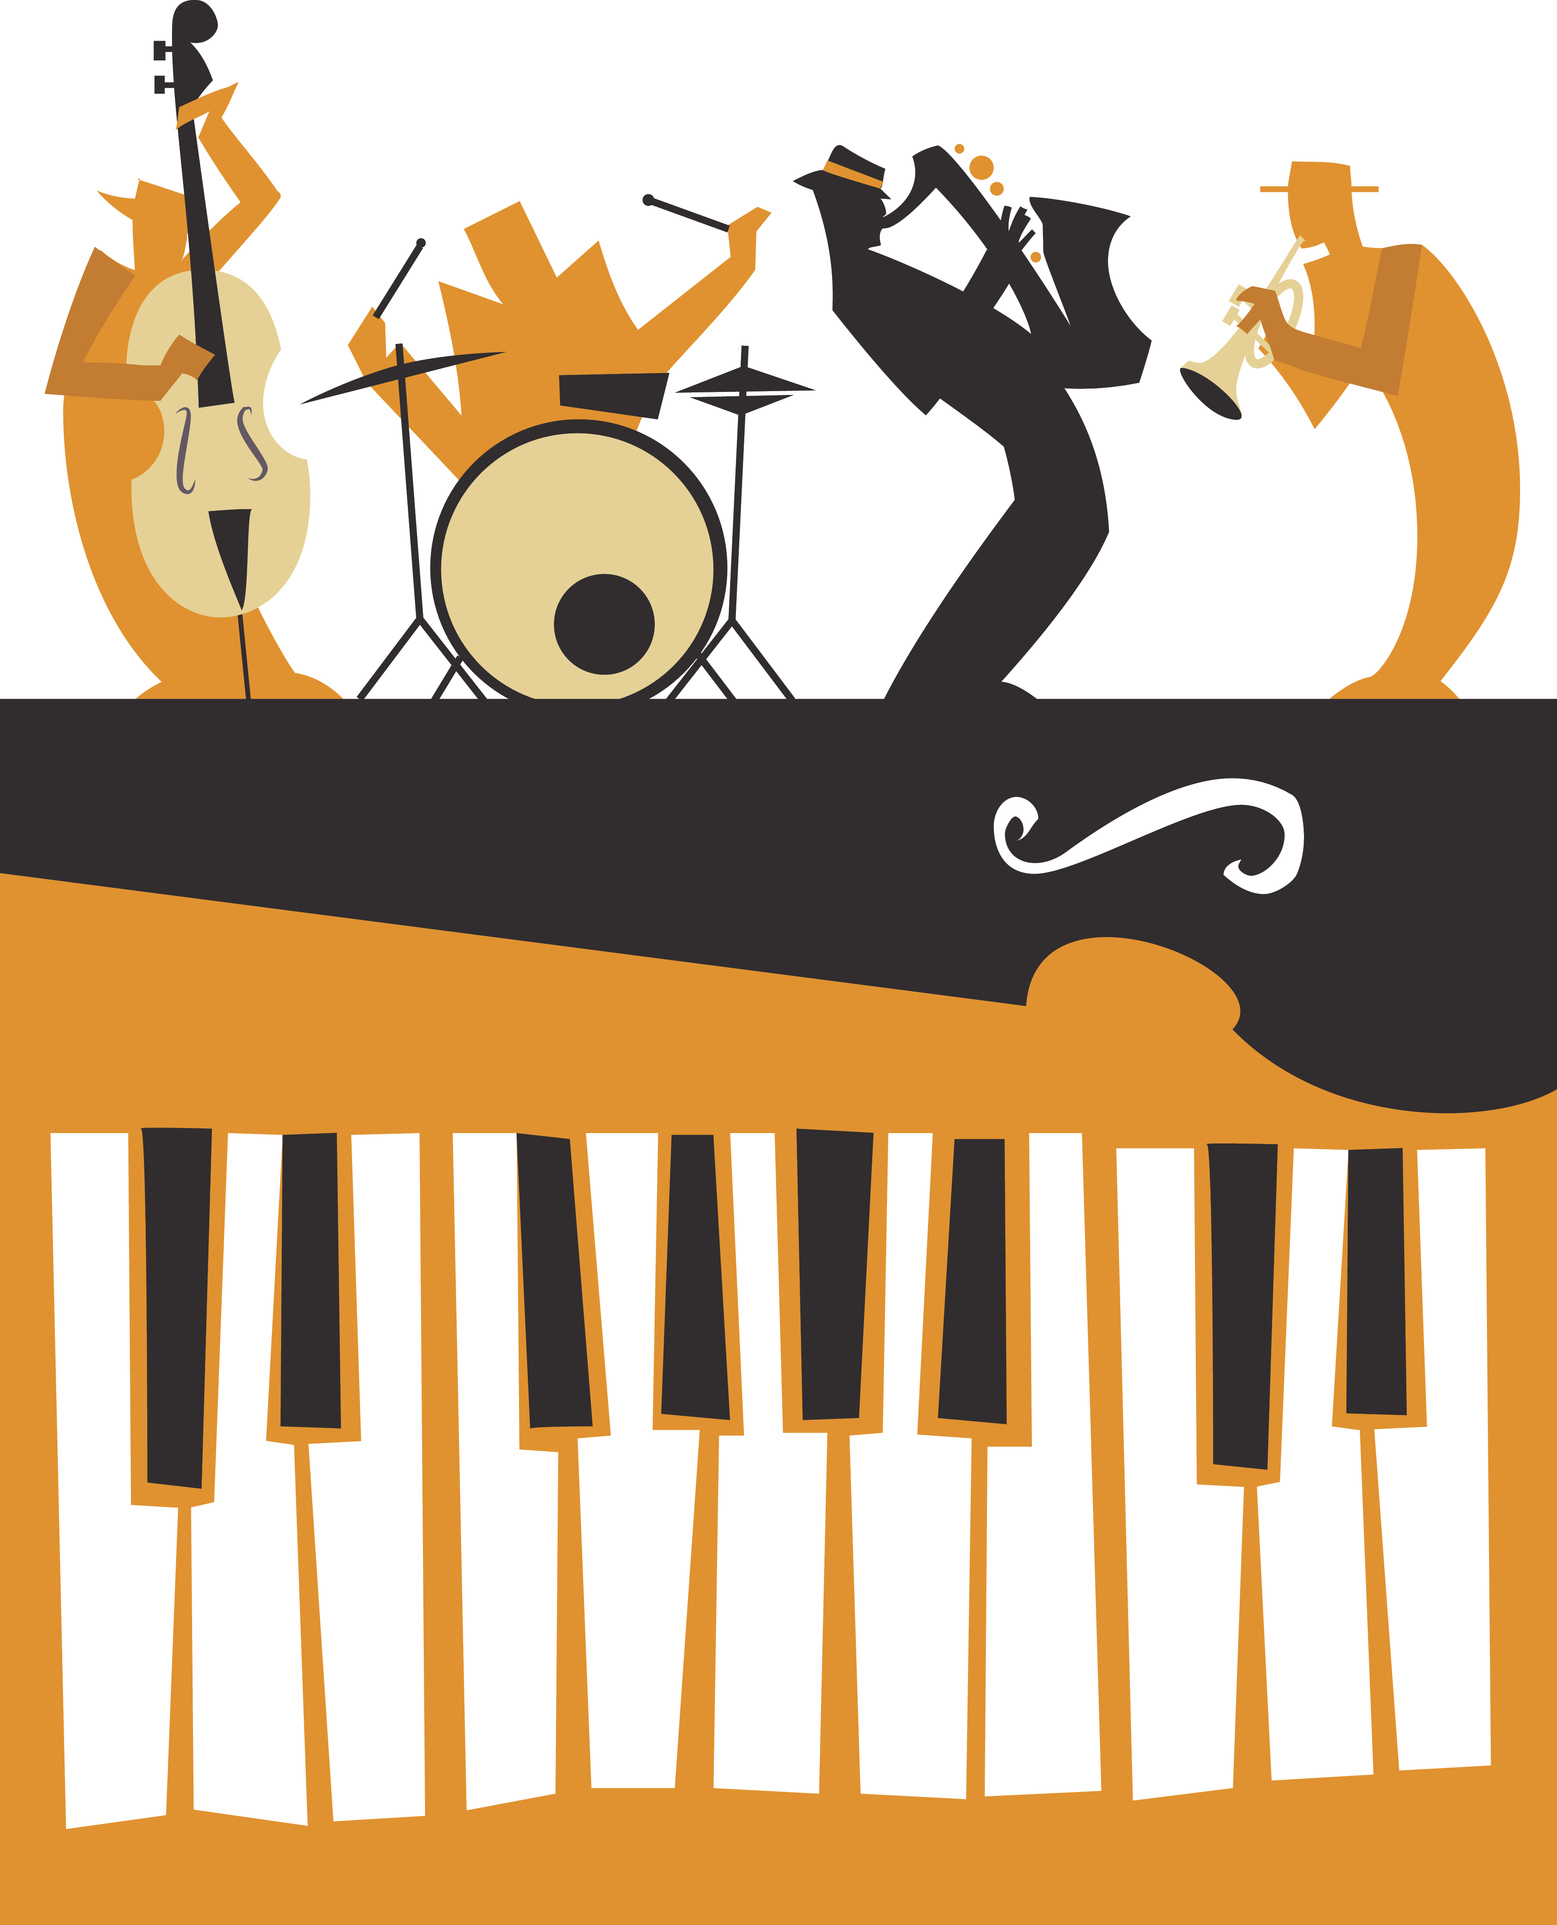 Jazz music holds an important role in the development of American culture